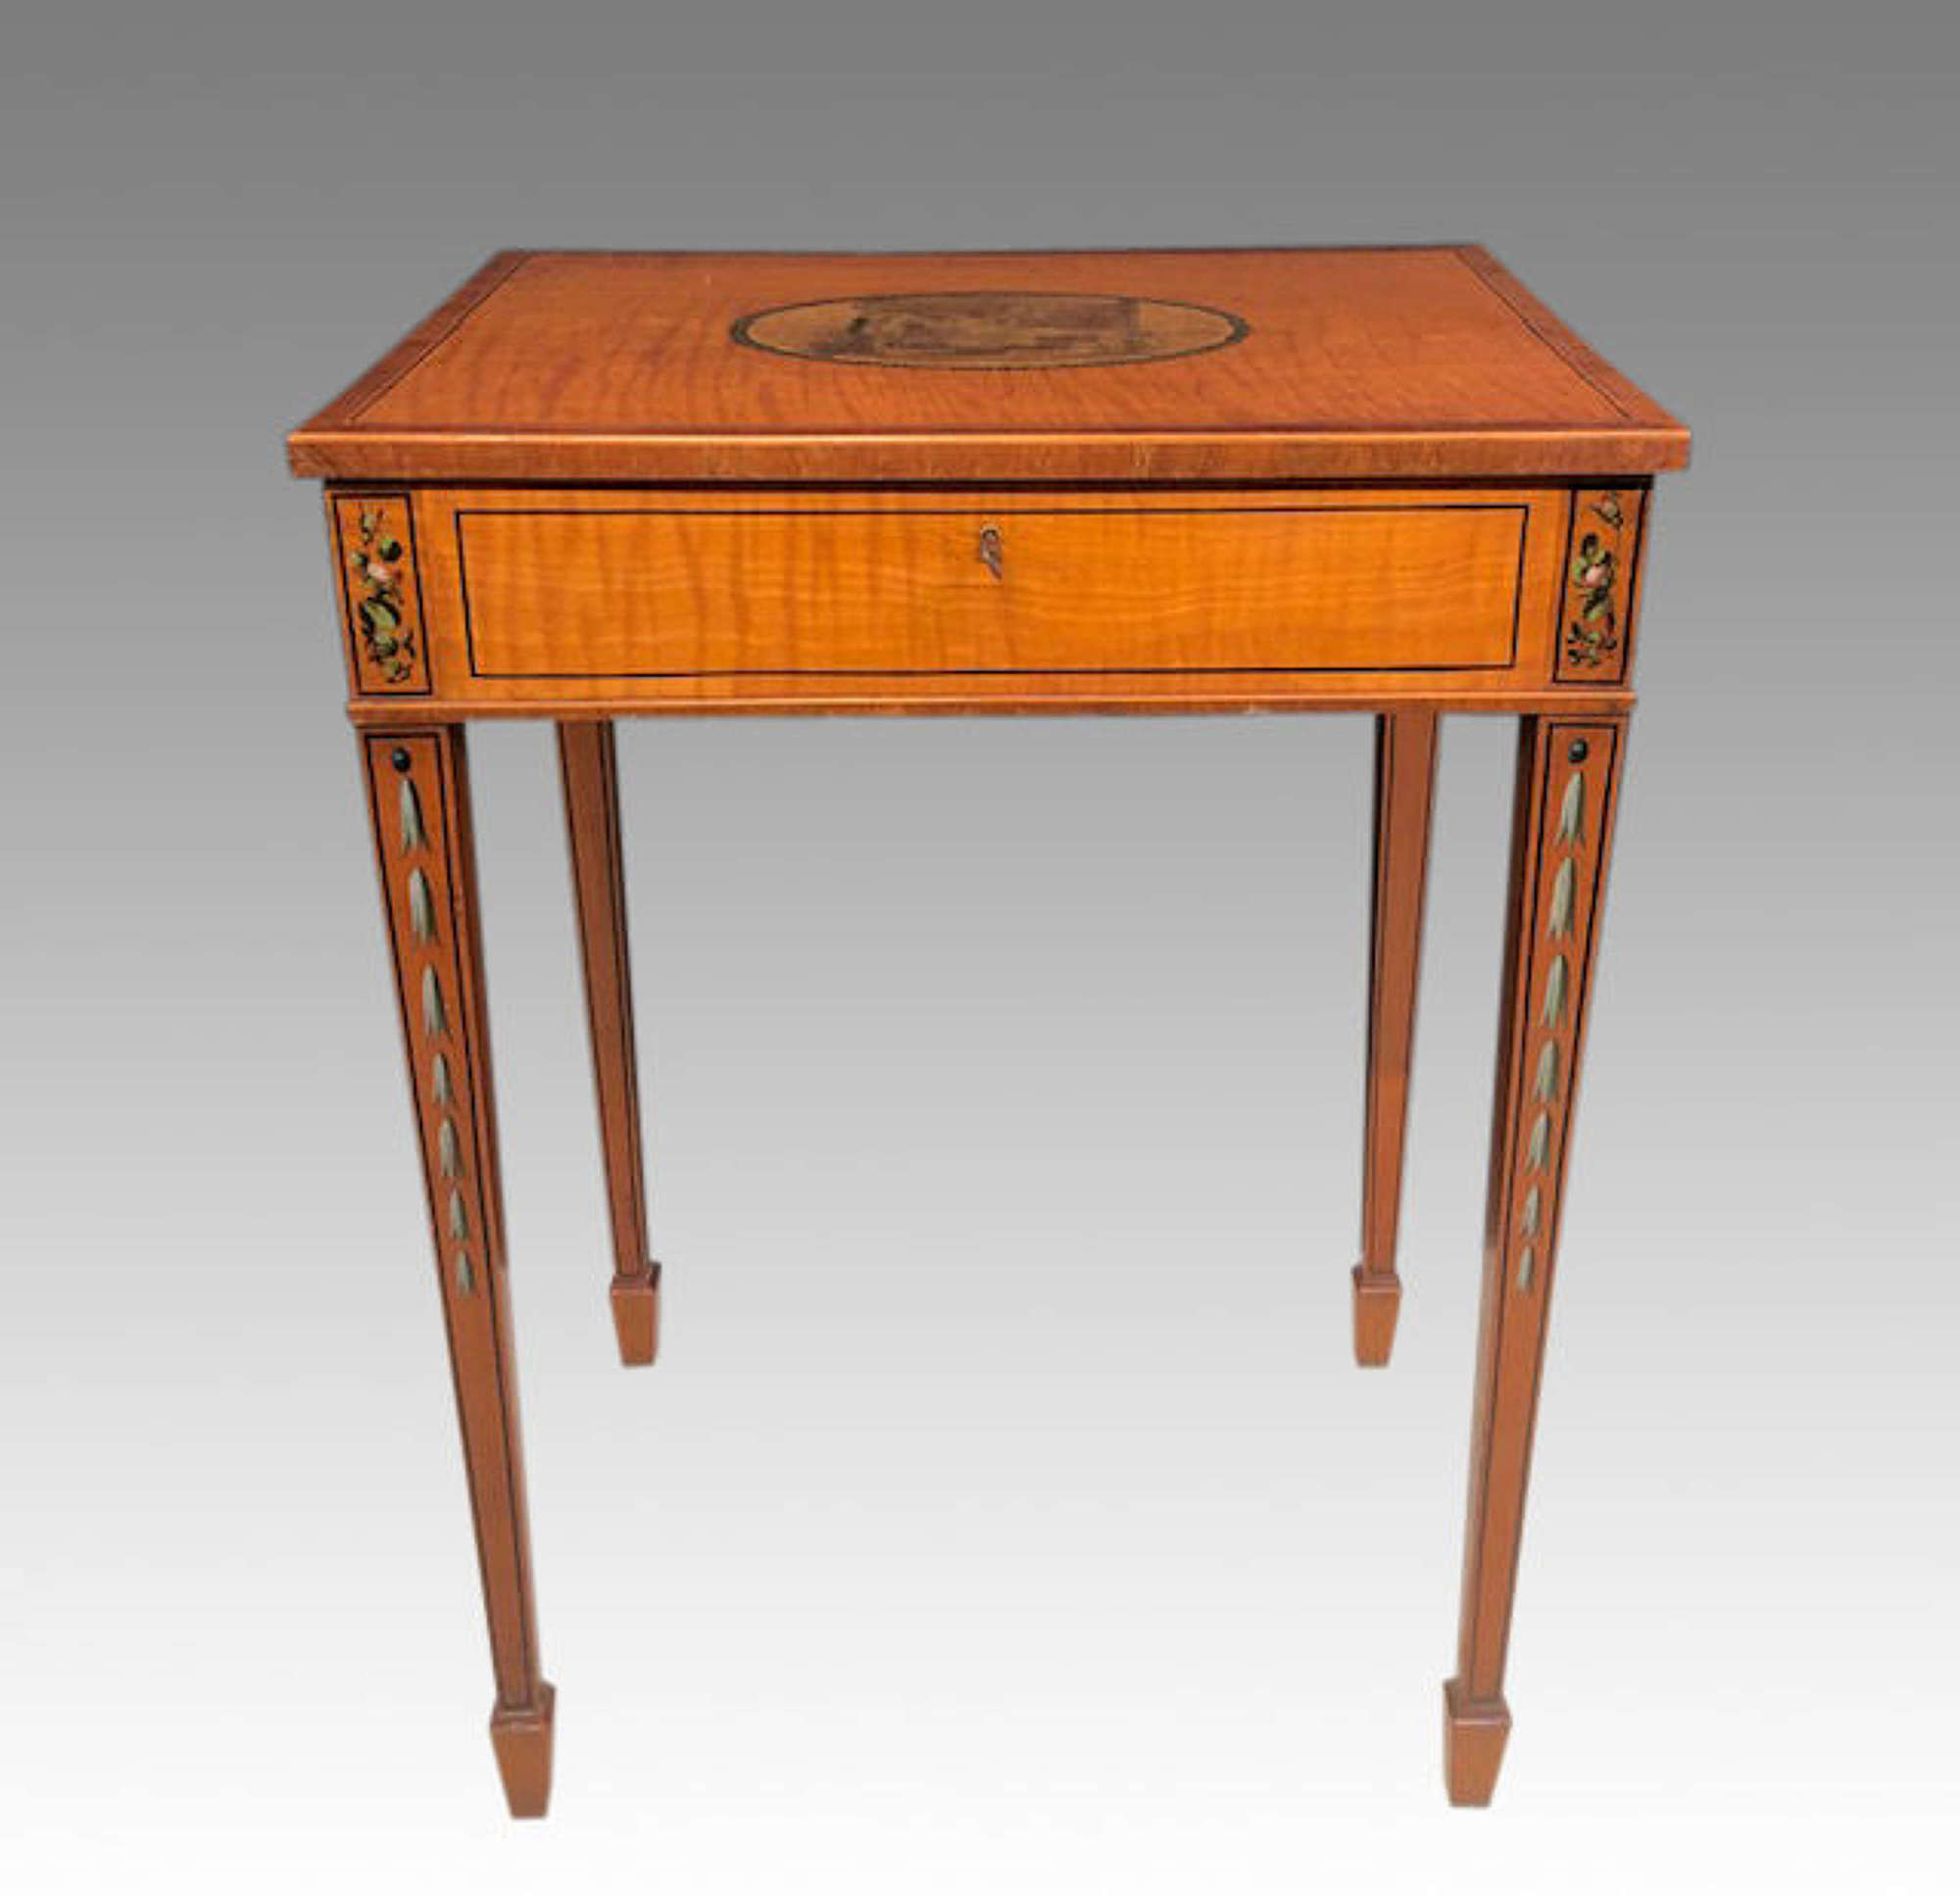 19th century painted satinwood work table.